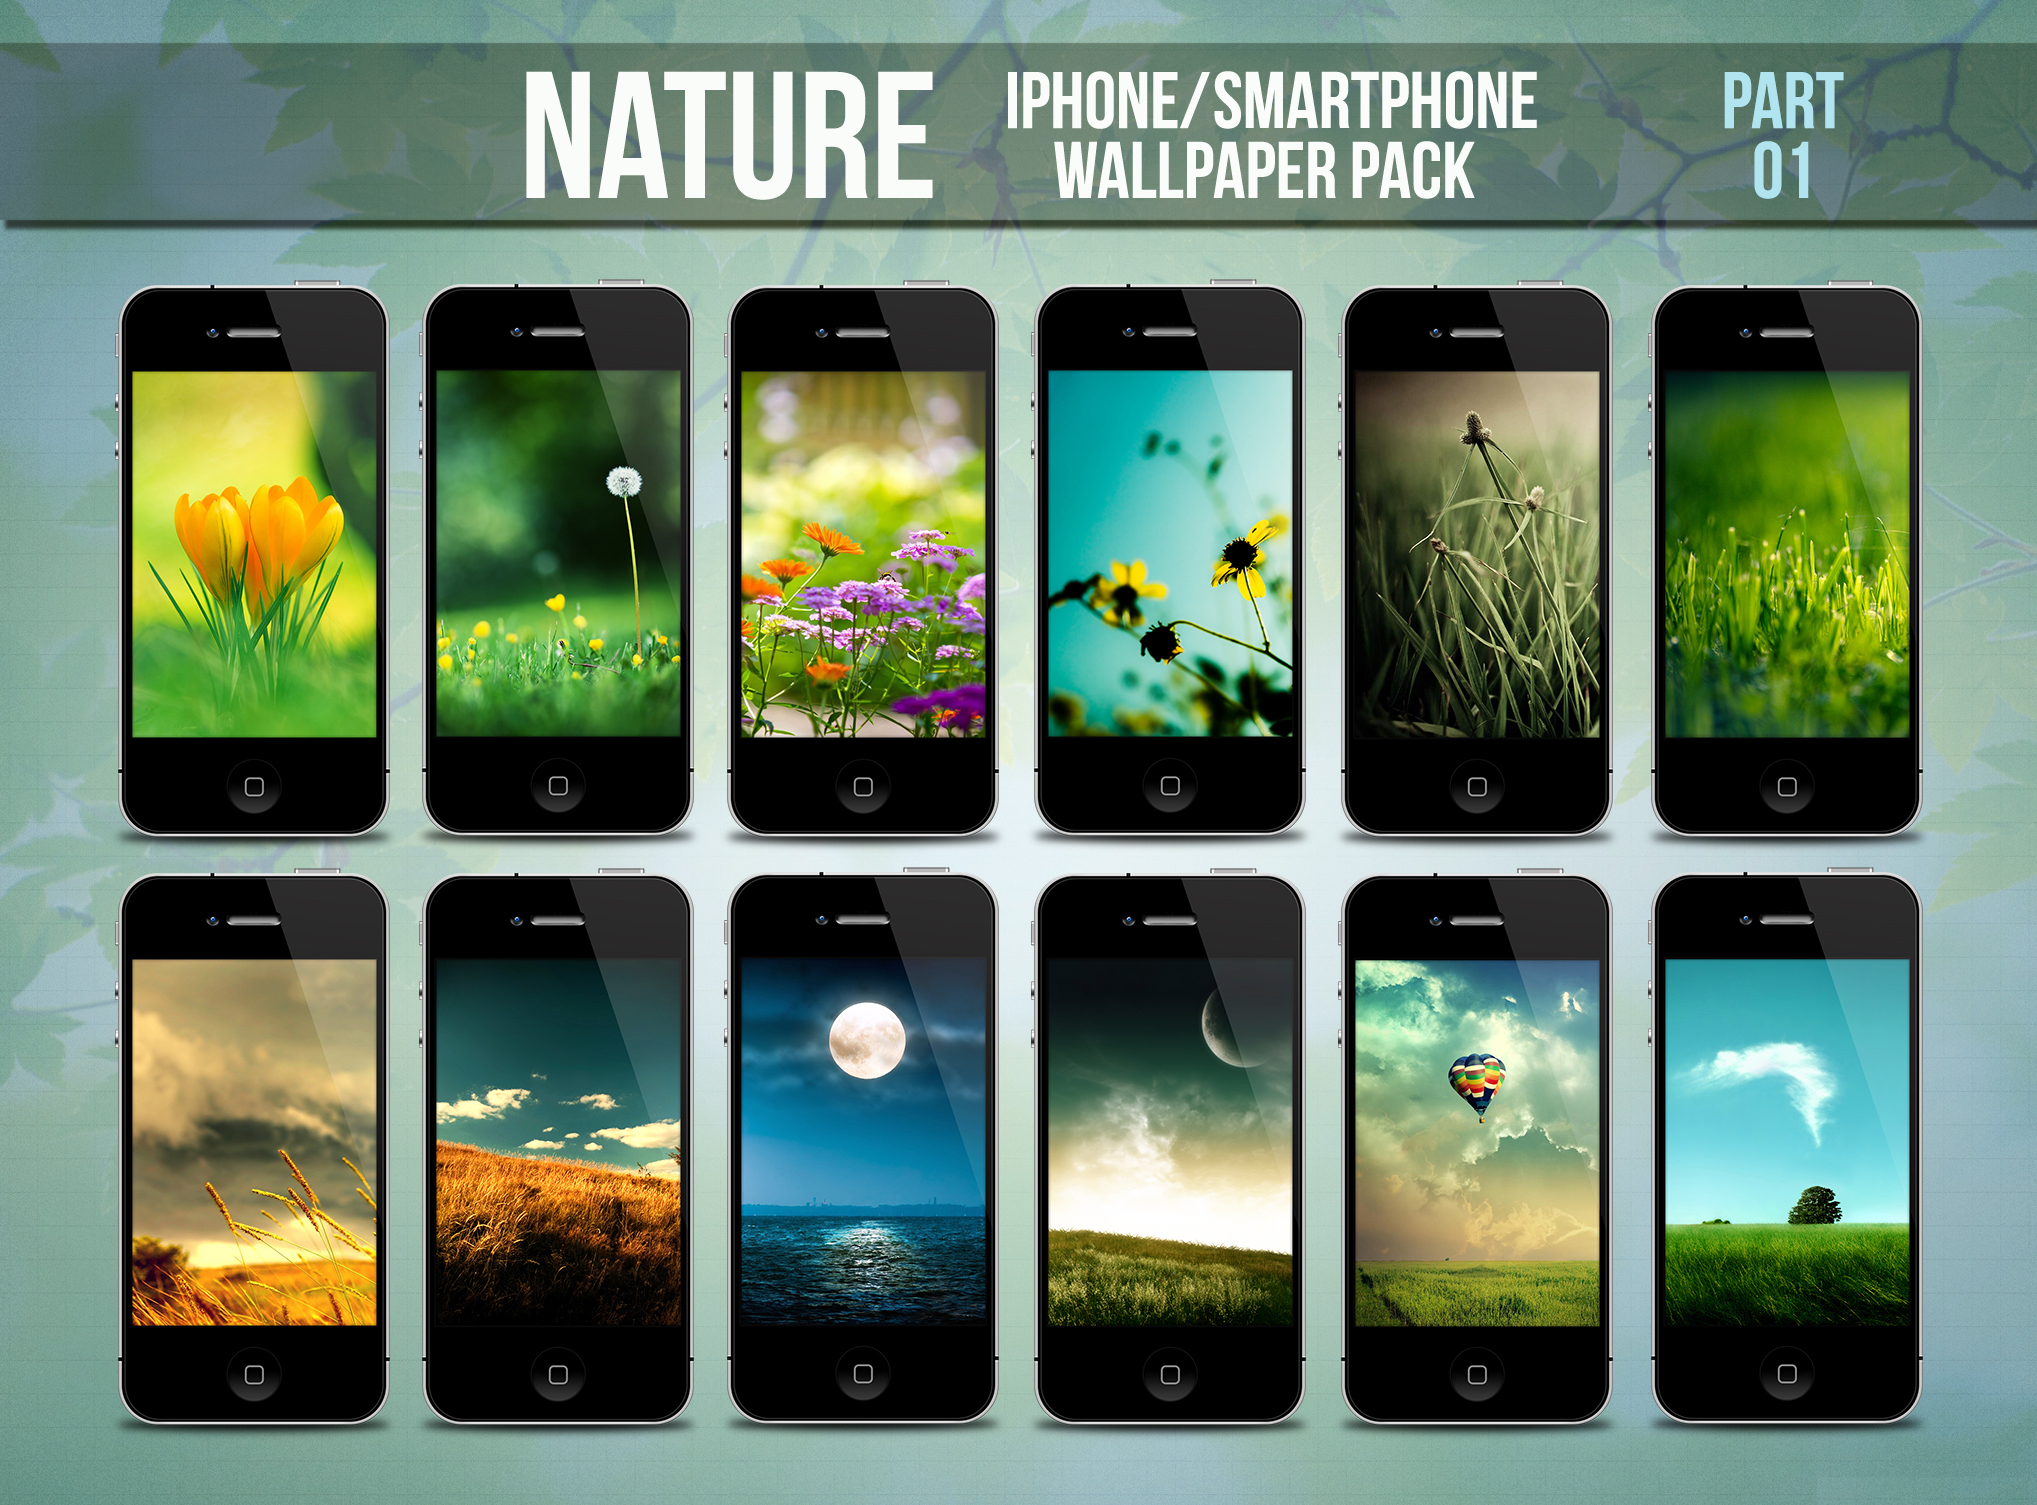 Nature iPhone/Smartphone Wallpaper Pack Part 2 by limav on DeviantArt